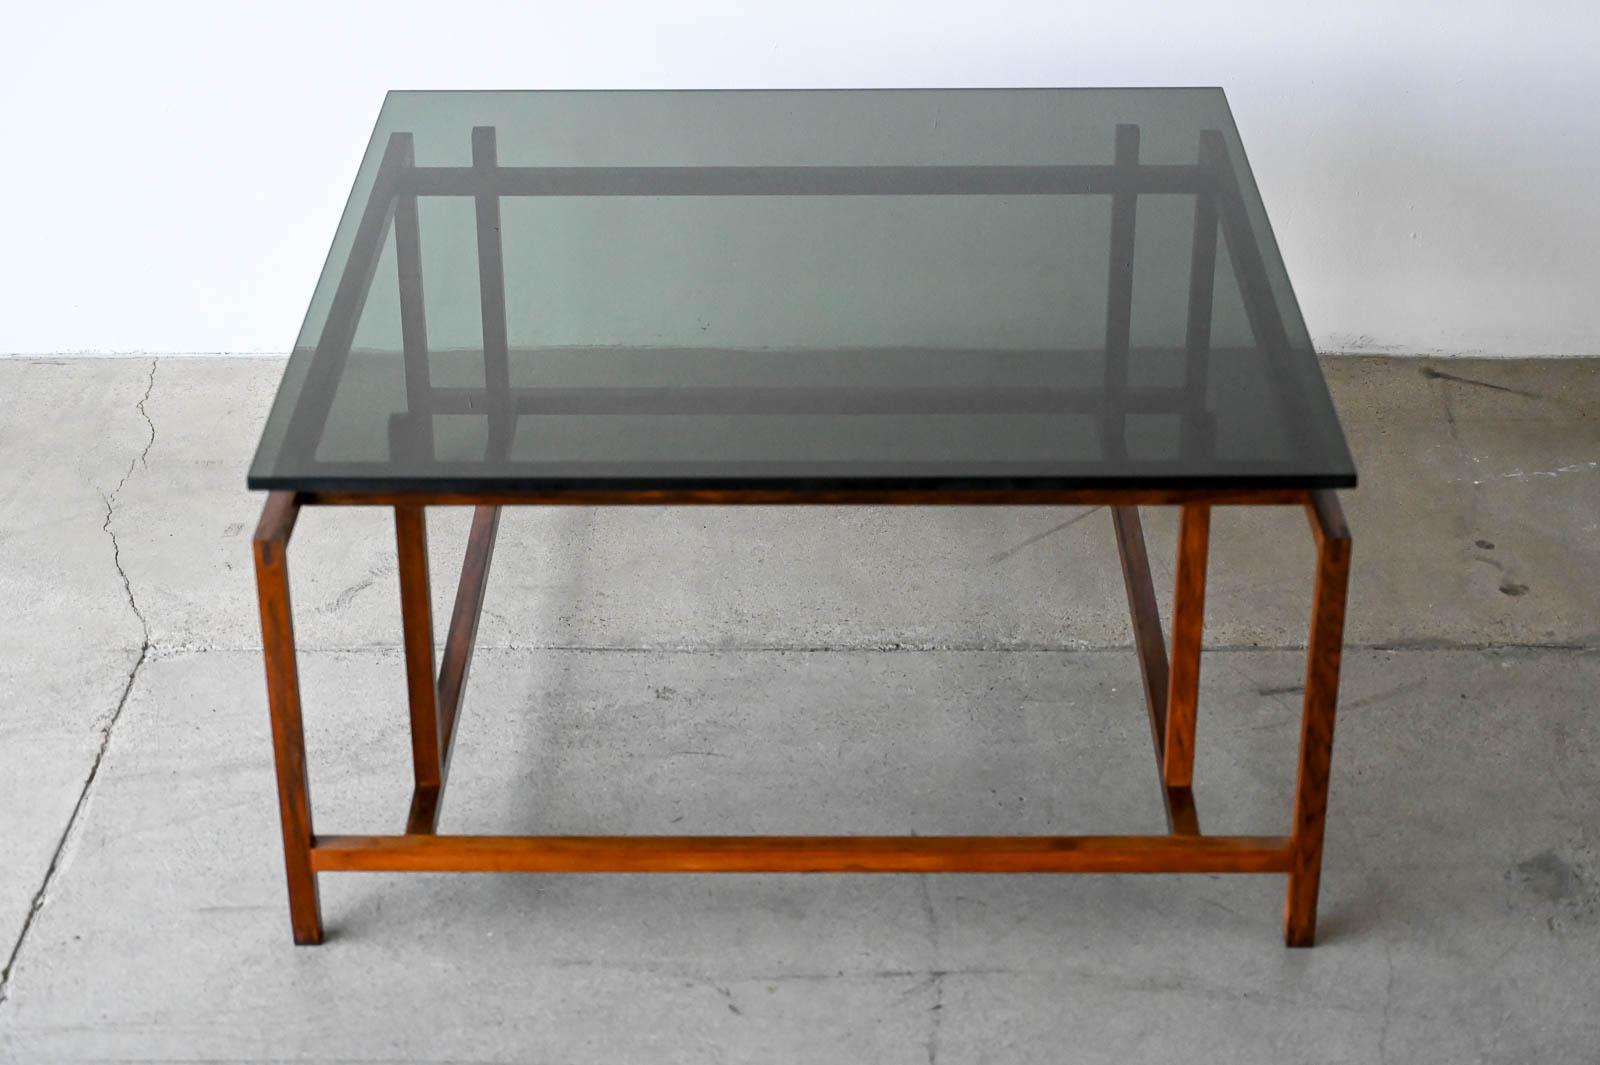 Henning Norgaard for Komfort Rosewood and Smoked Glass Coffee Table, ca. 1960.  Beautiful delicate rosewood frame with original smoked glass top that floats effortlessly on the notched frame.  Piece is in very good original condition with only